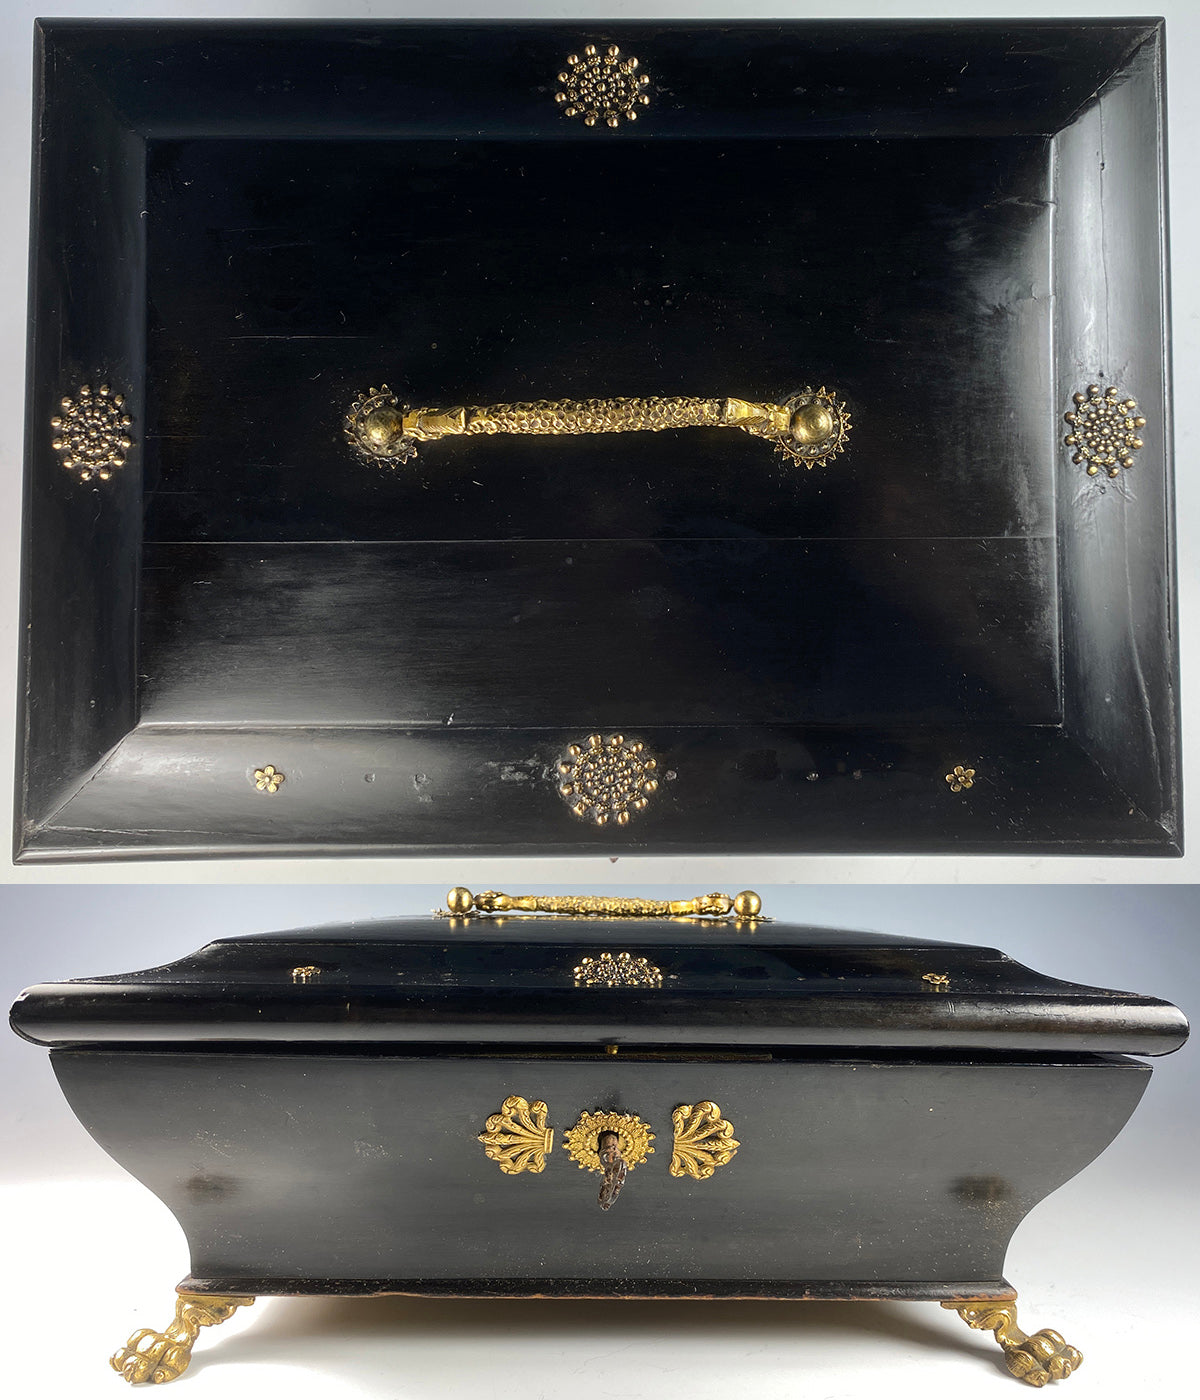 Antique French Empire Sewing Box or Jewelry Casket, Applique and Ebony, Lock with Key